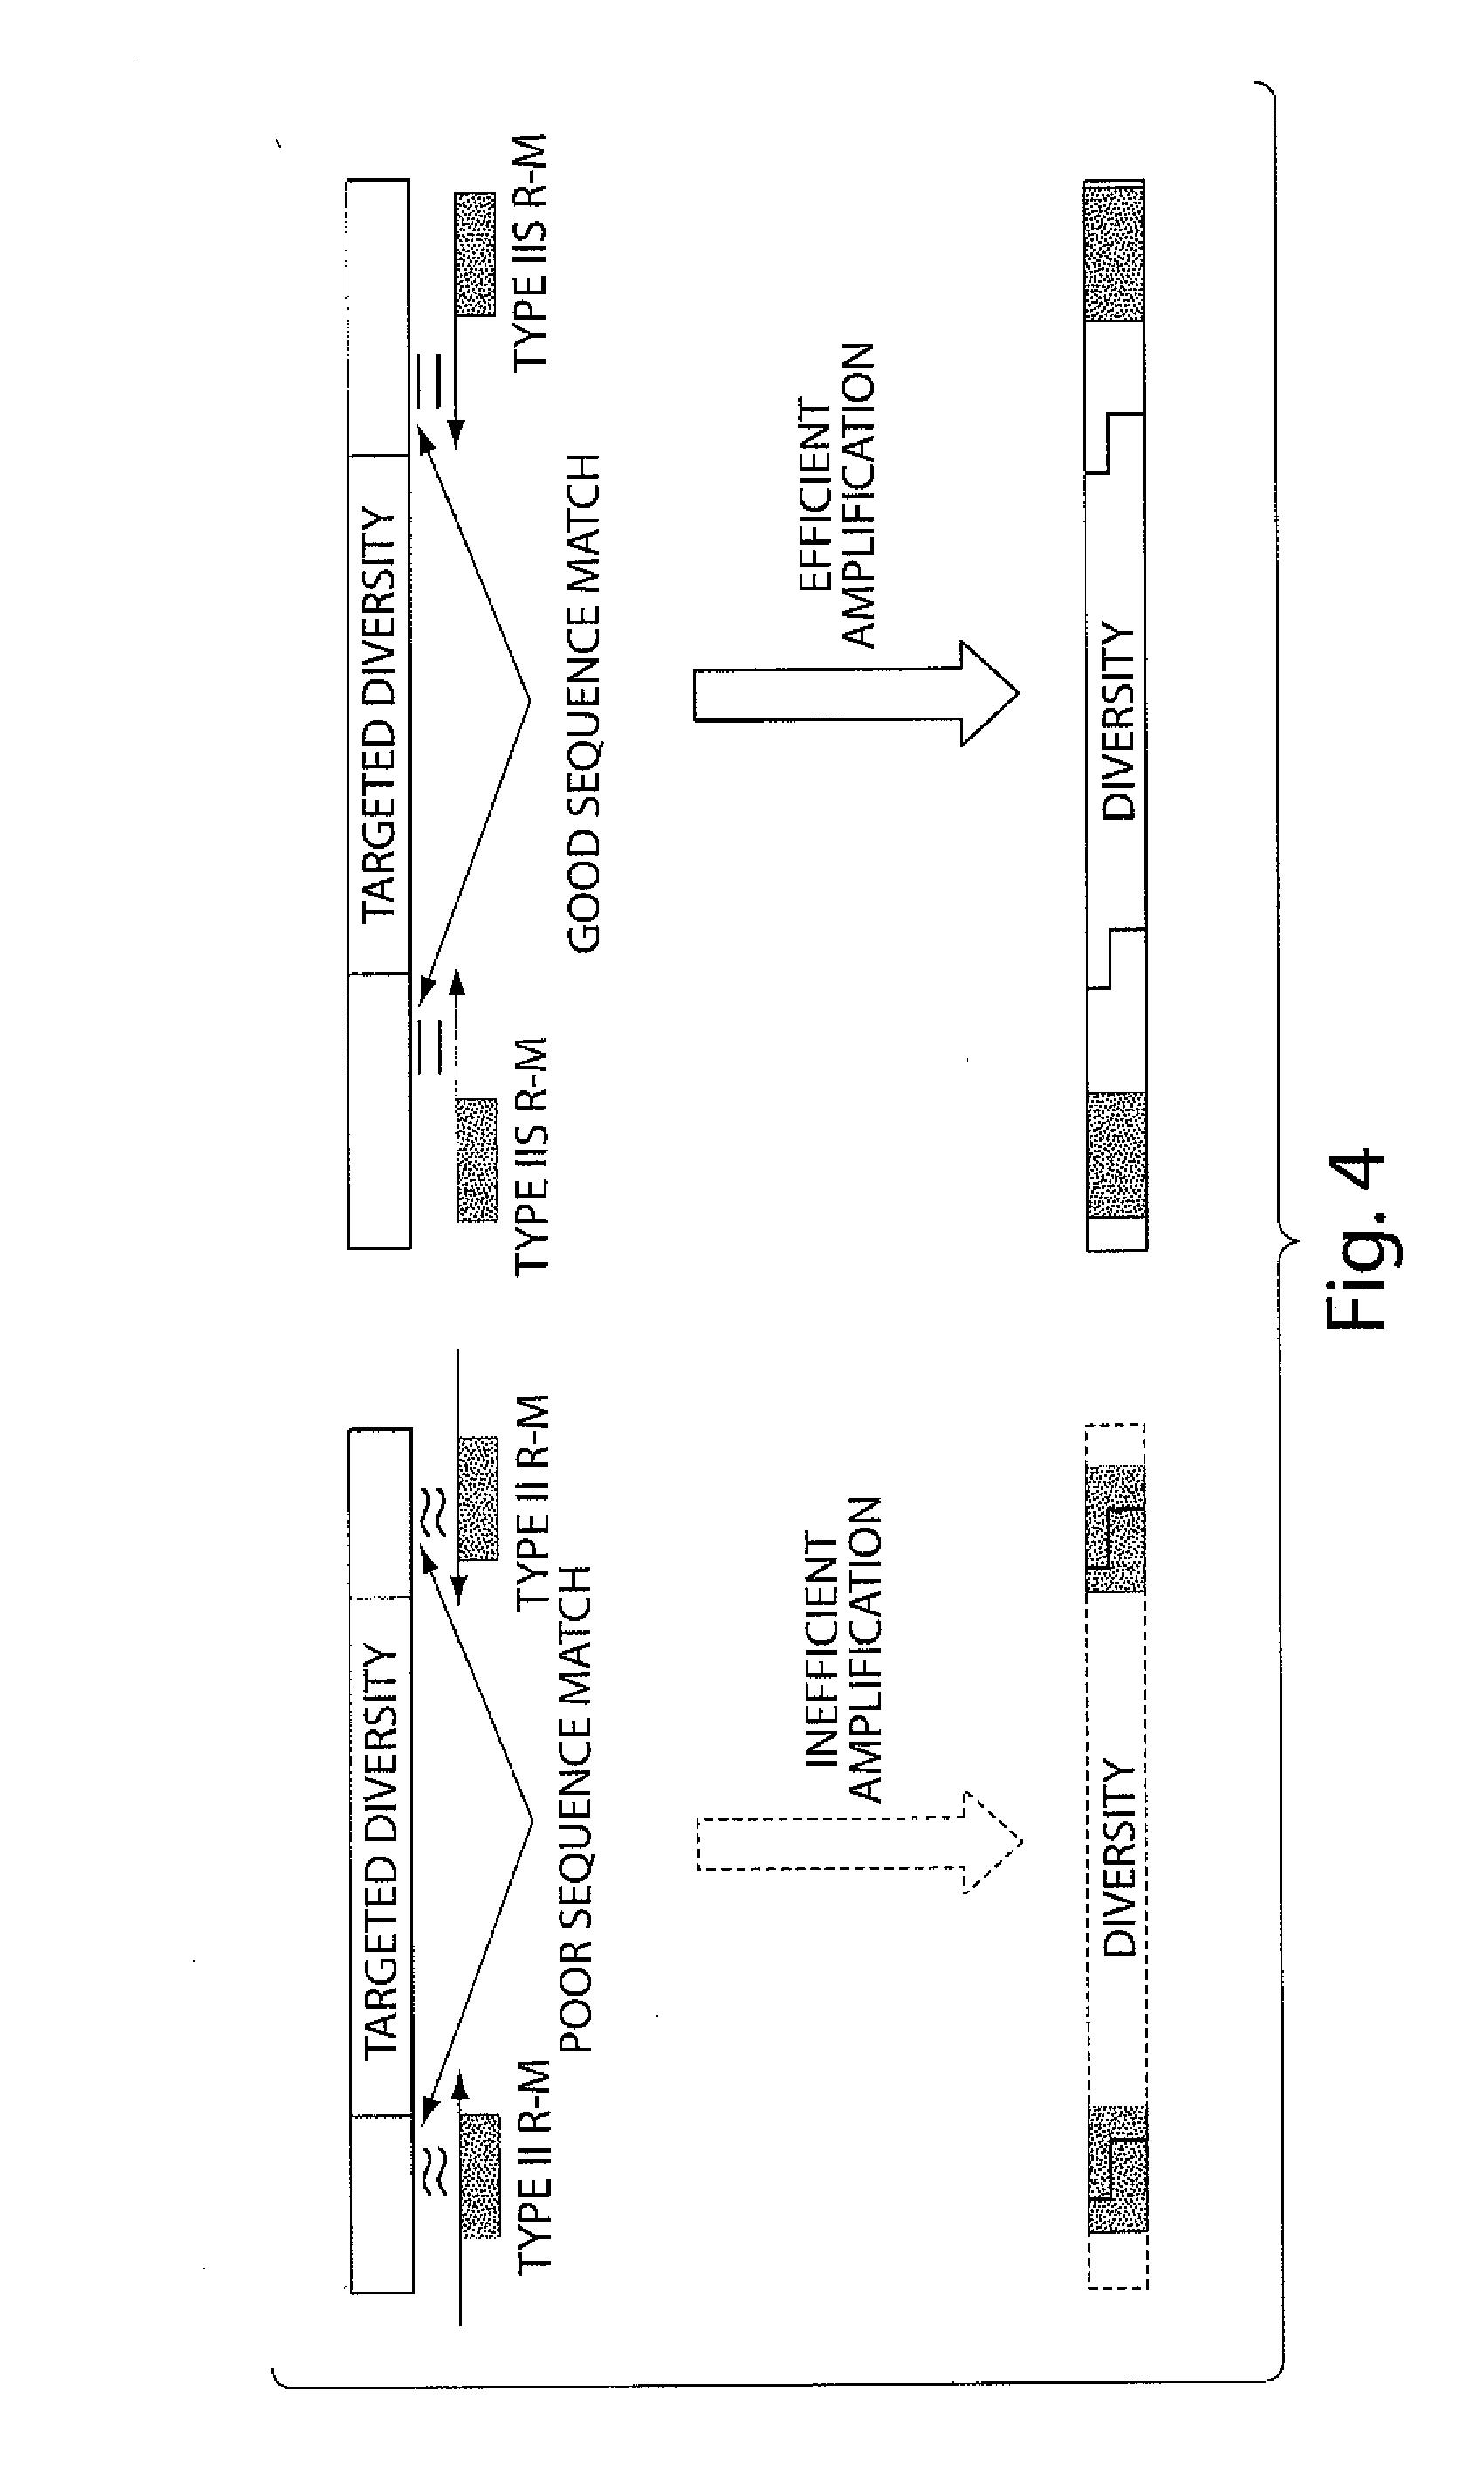 Synthetic Polypeptide Libraries and Methods for Generating Naturally Diversified Polypeptide Variants